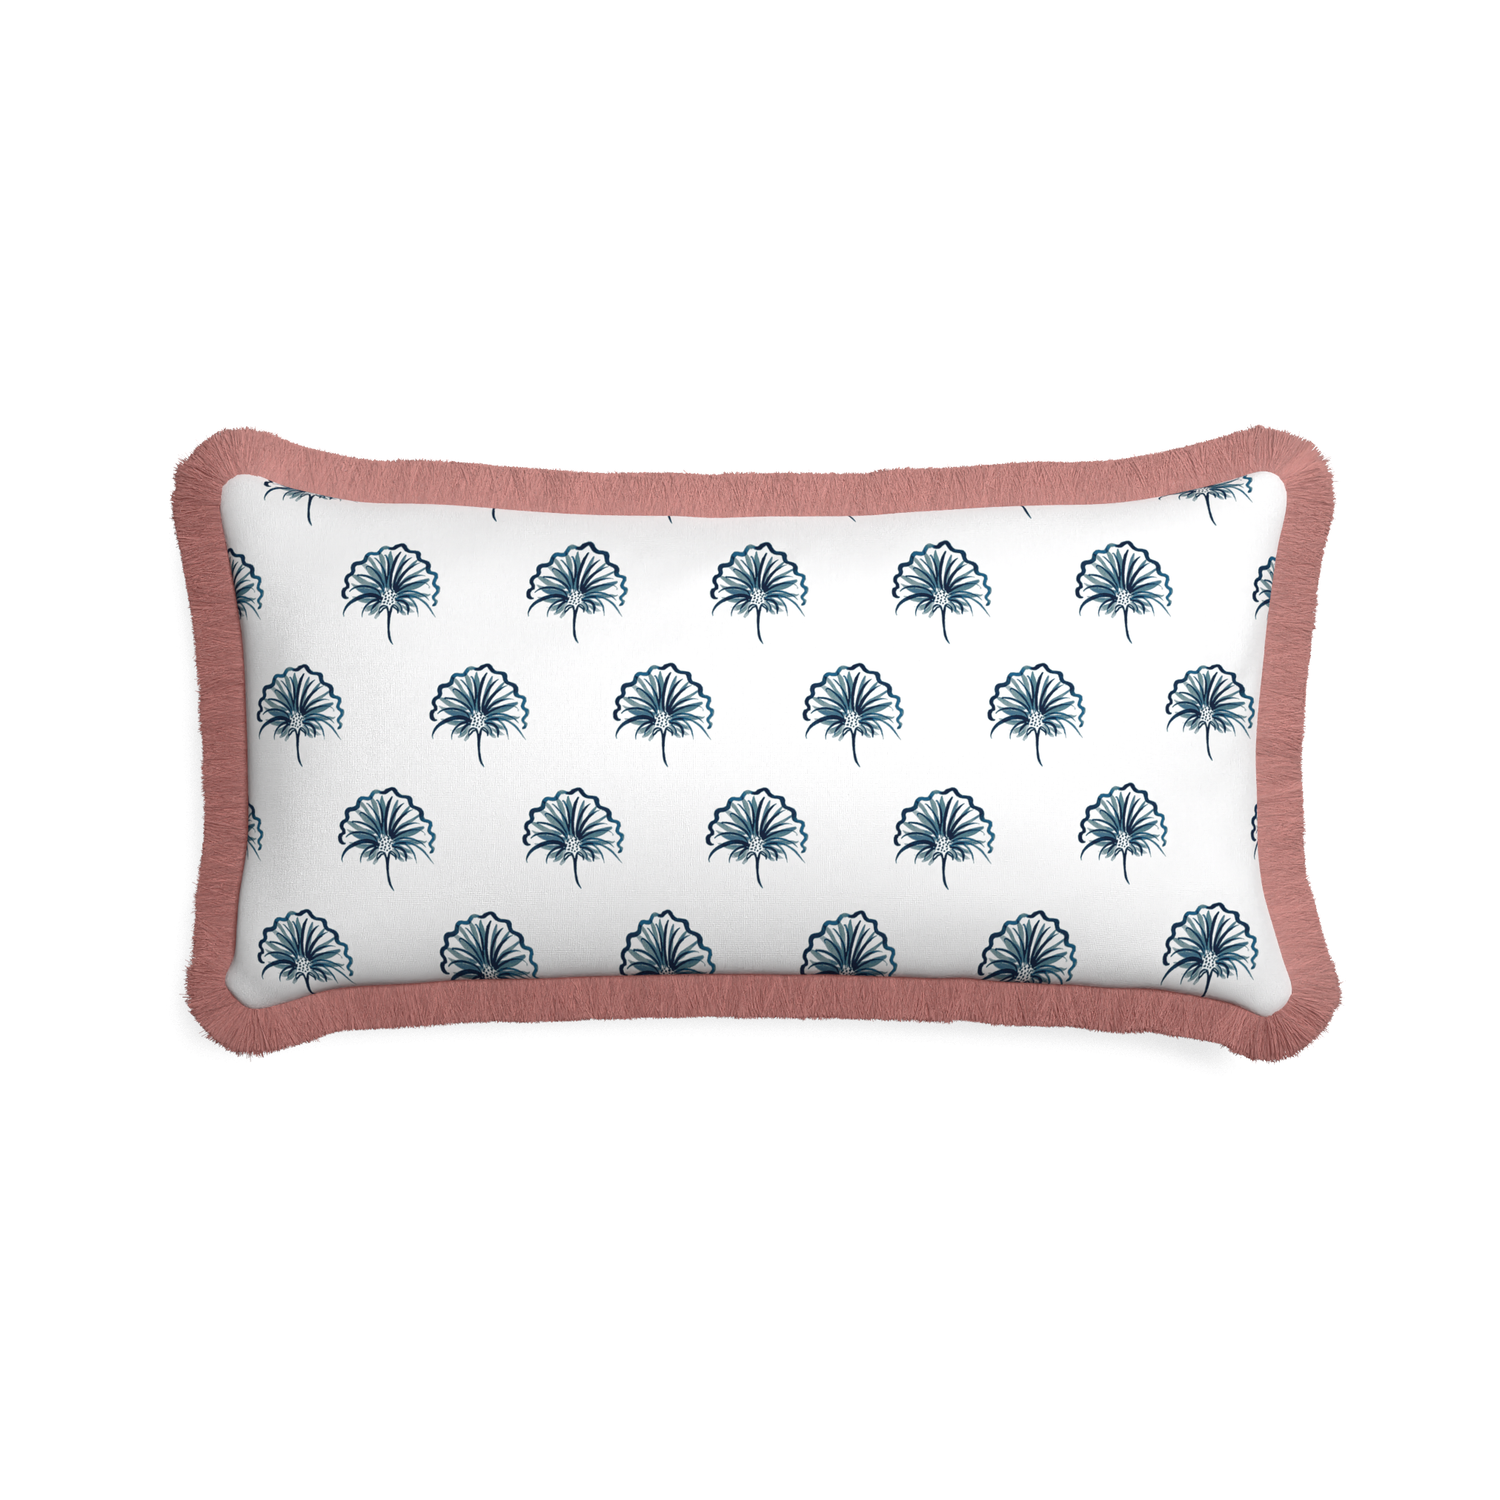 Midi-lumbar penelope midnight custom floral navypillow with d fringe on white background